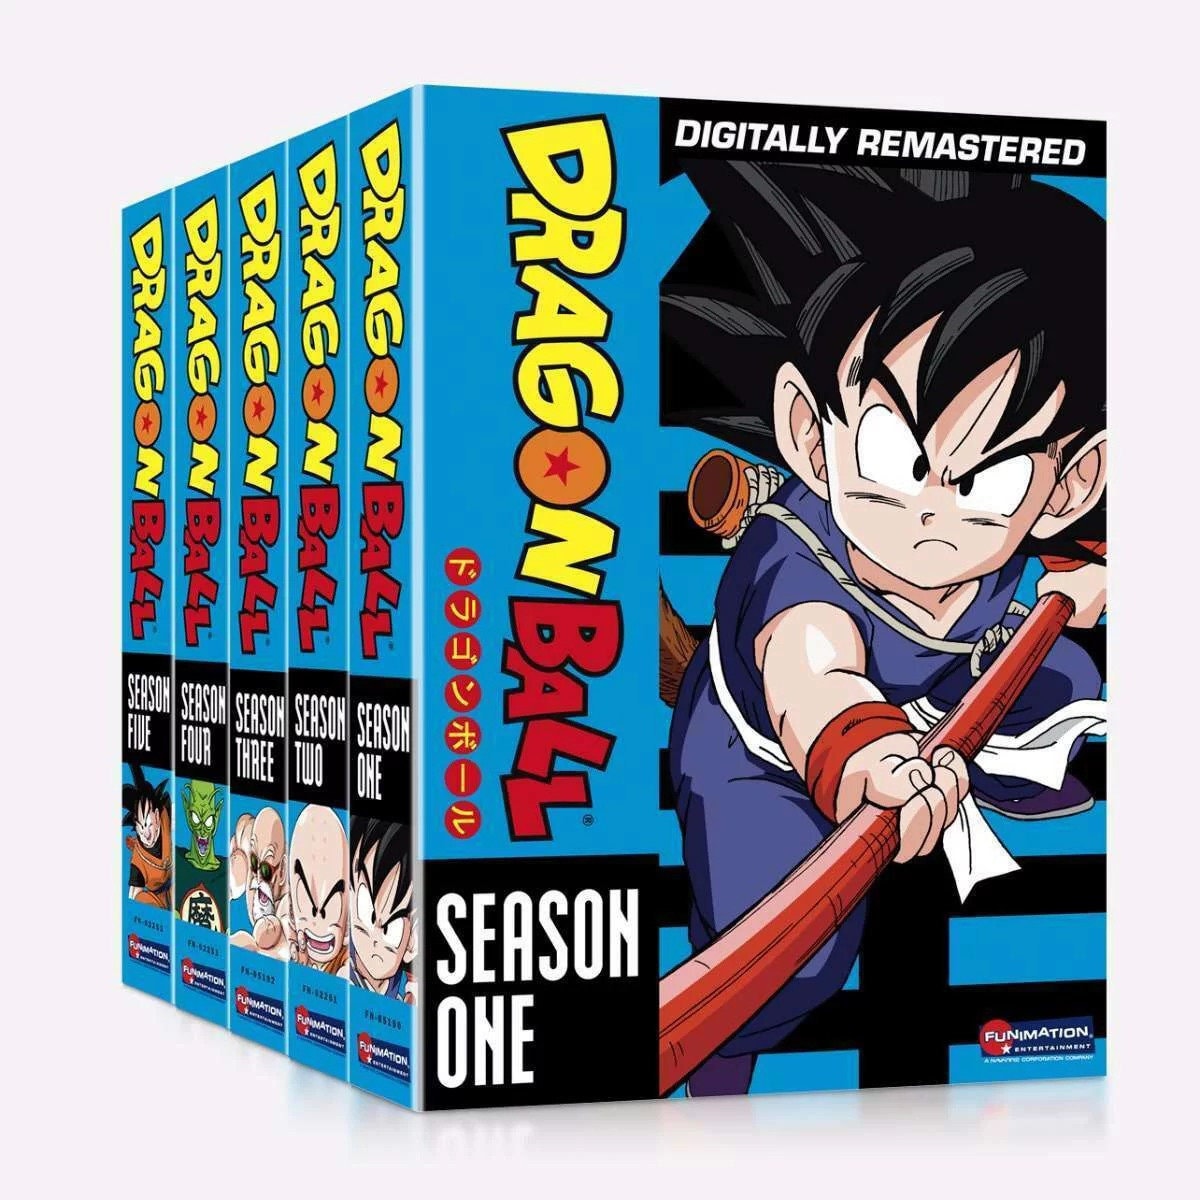 DVD Dragon Ball Collection Complete TV Series 639 Episode English